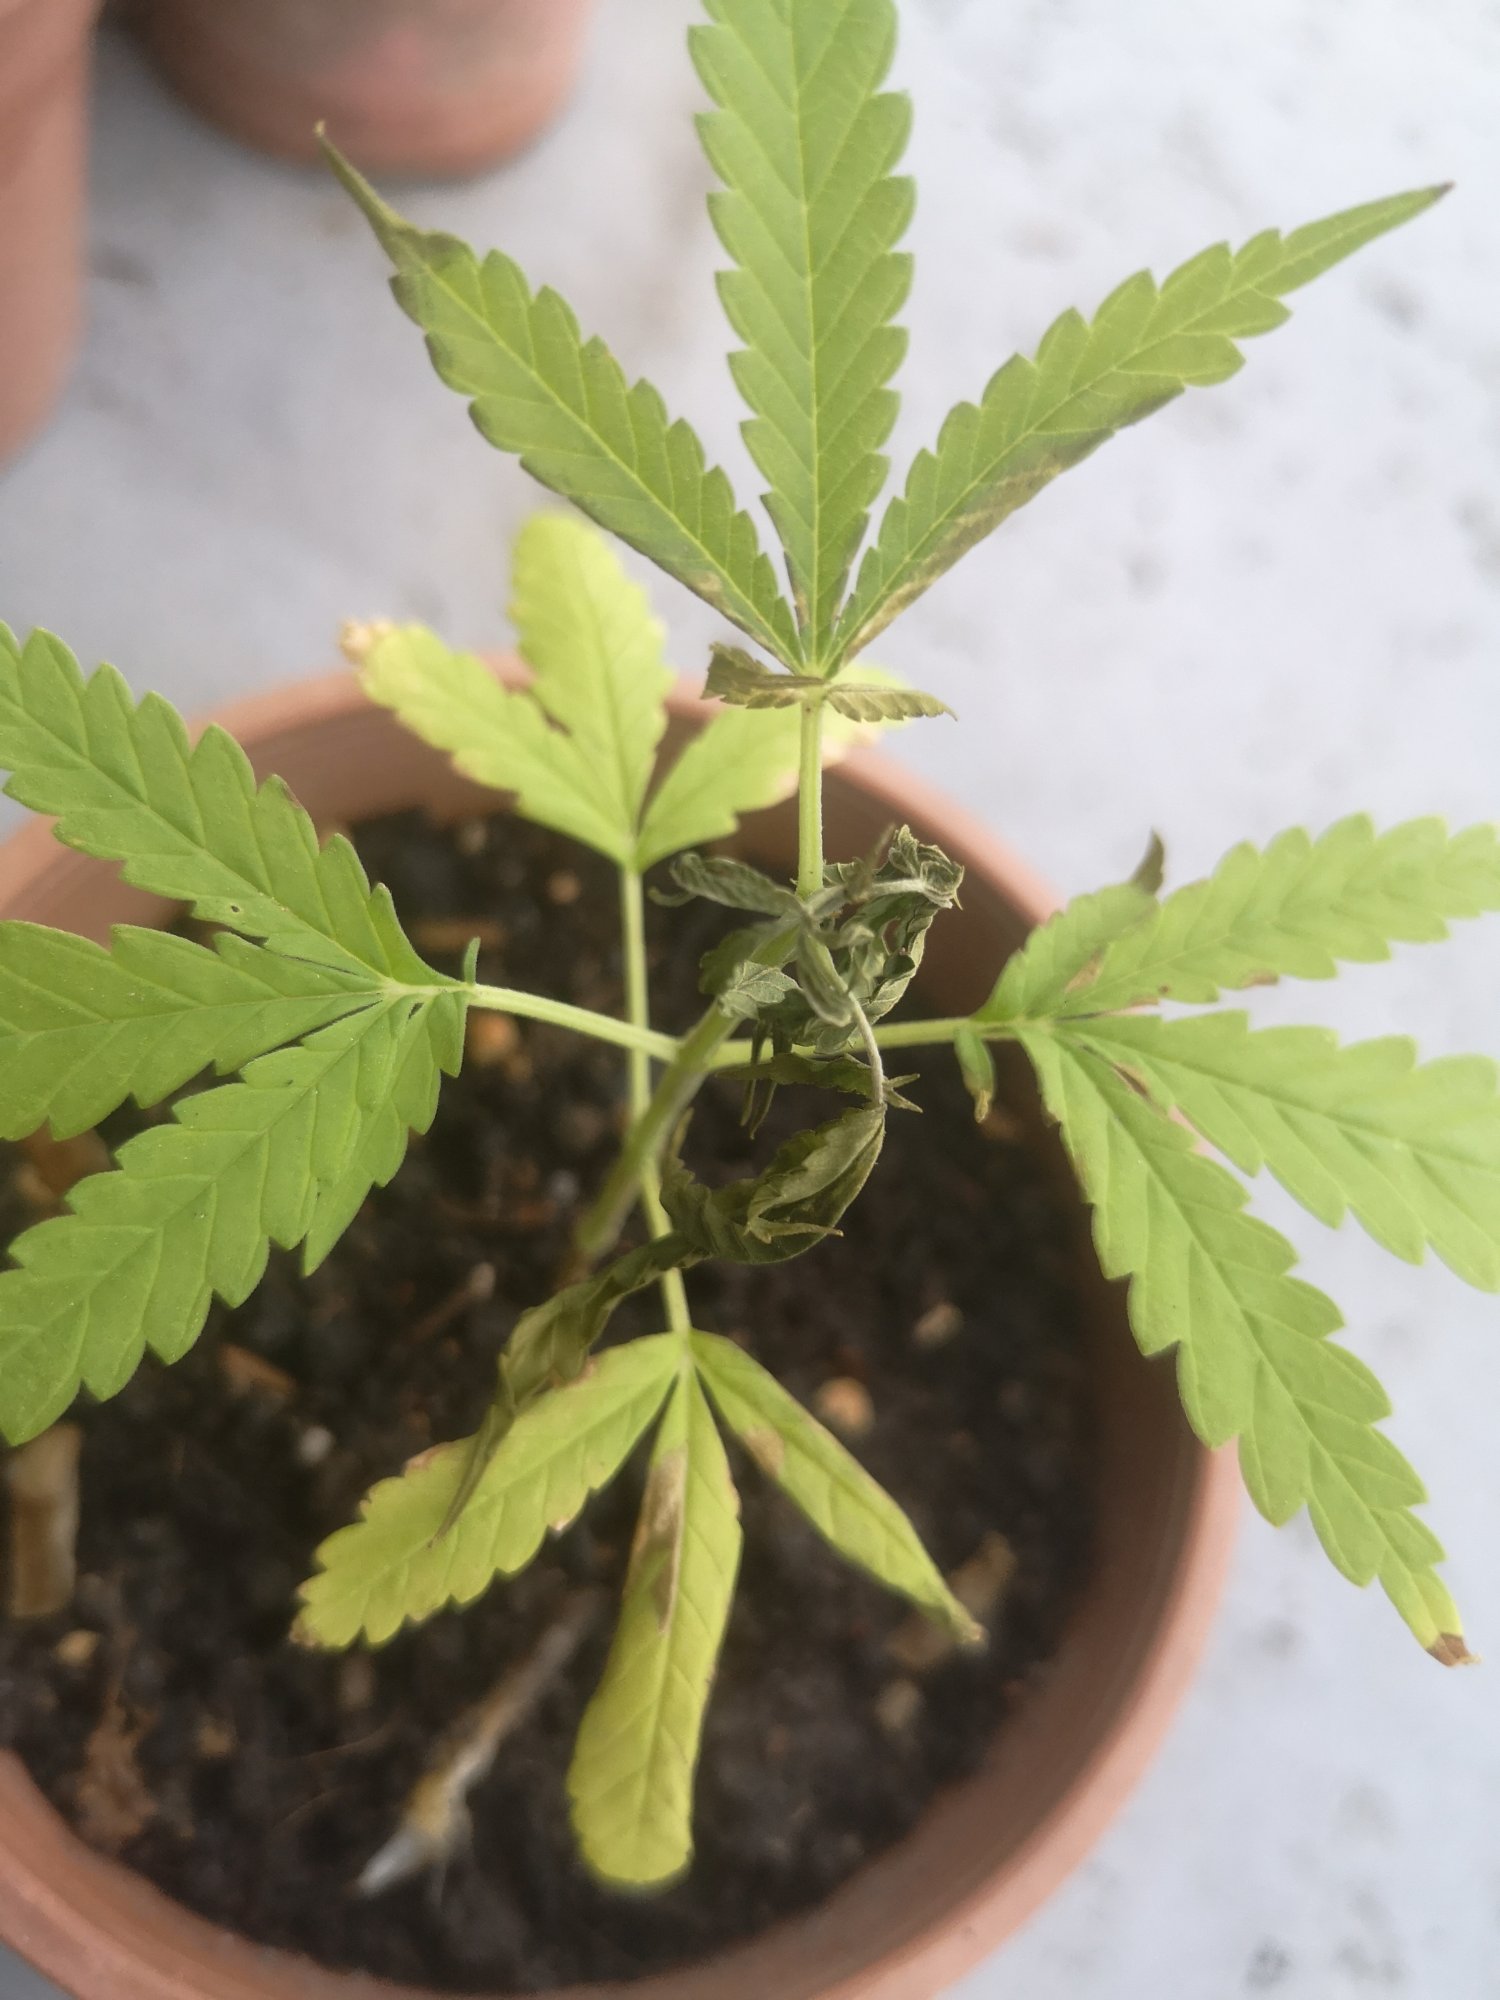 Need help on first grow due to homemade pesticide 2